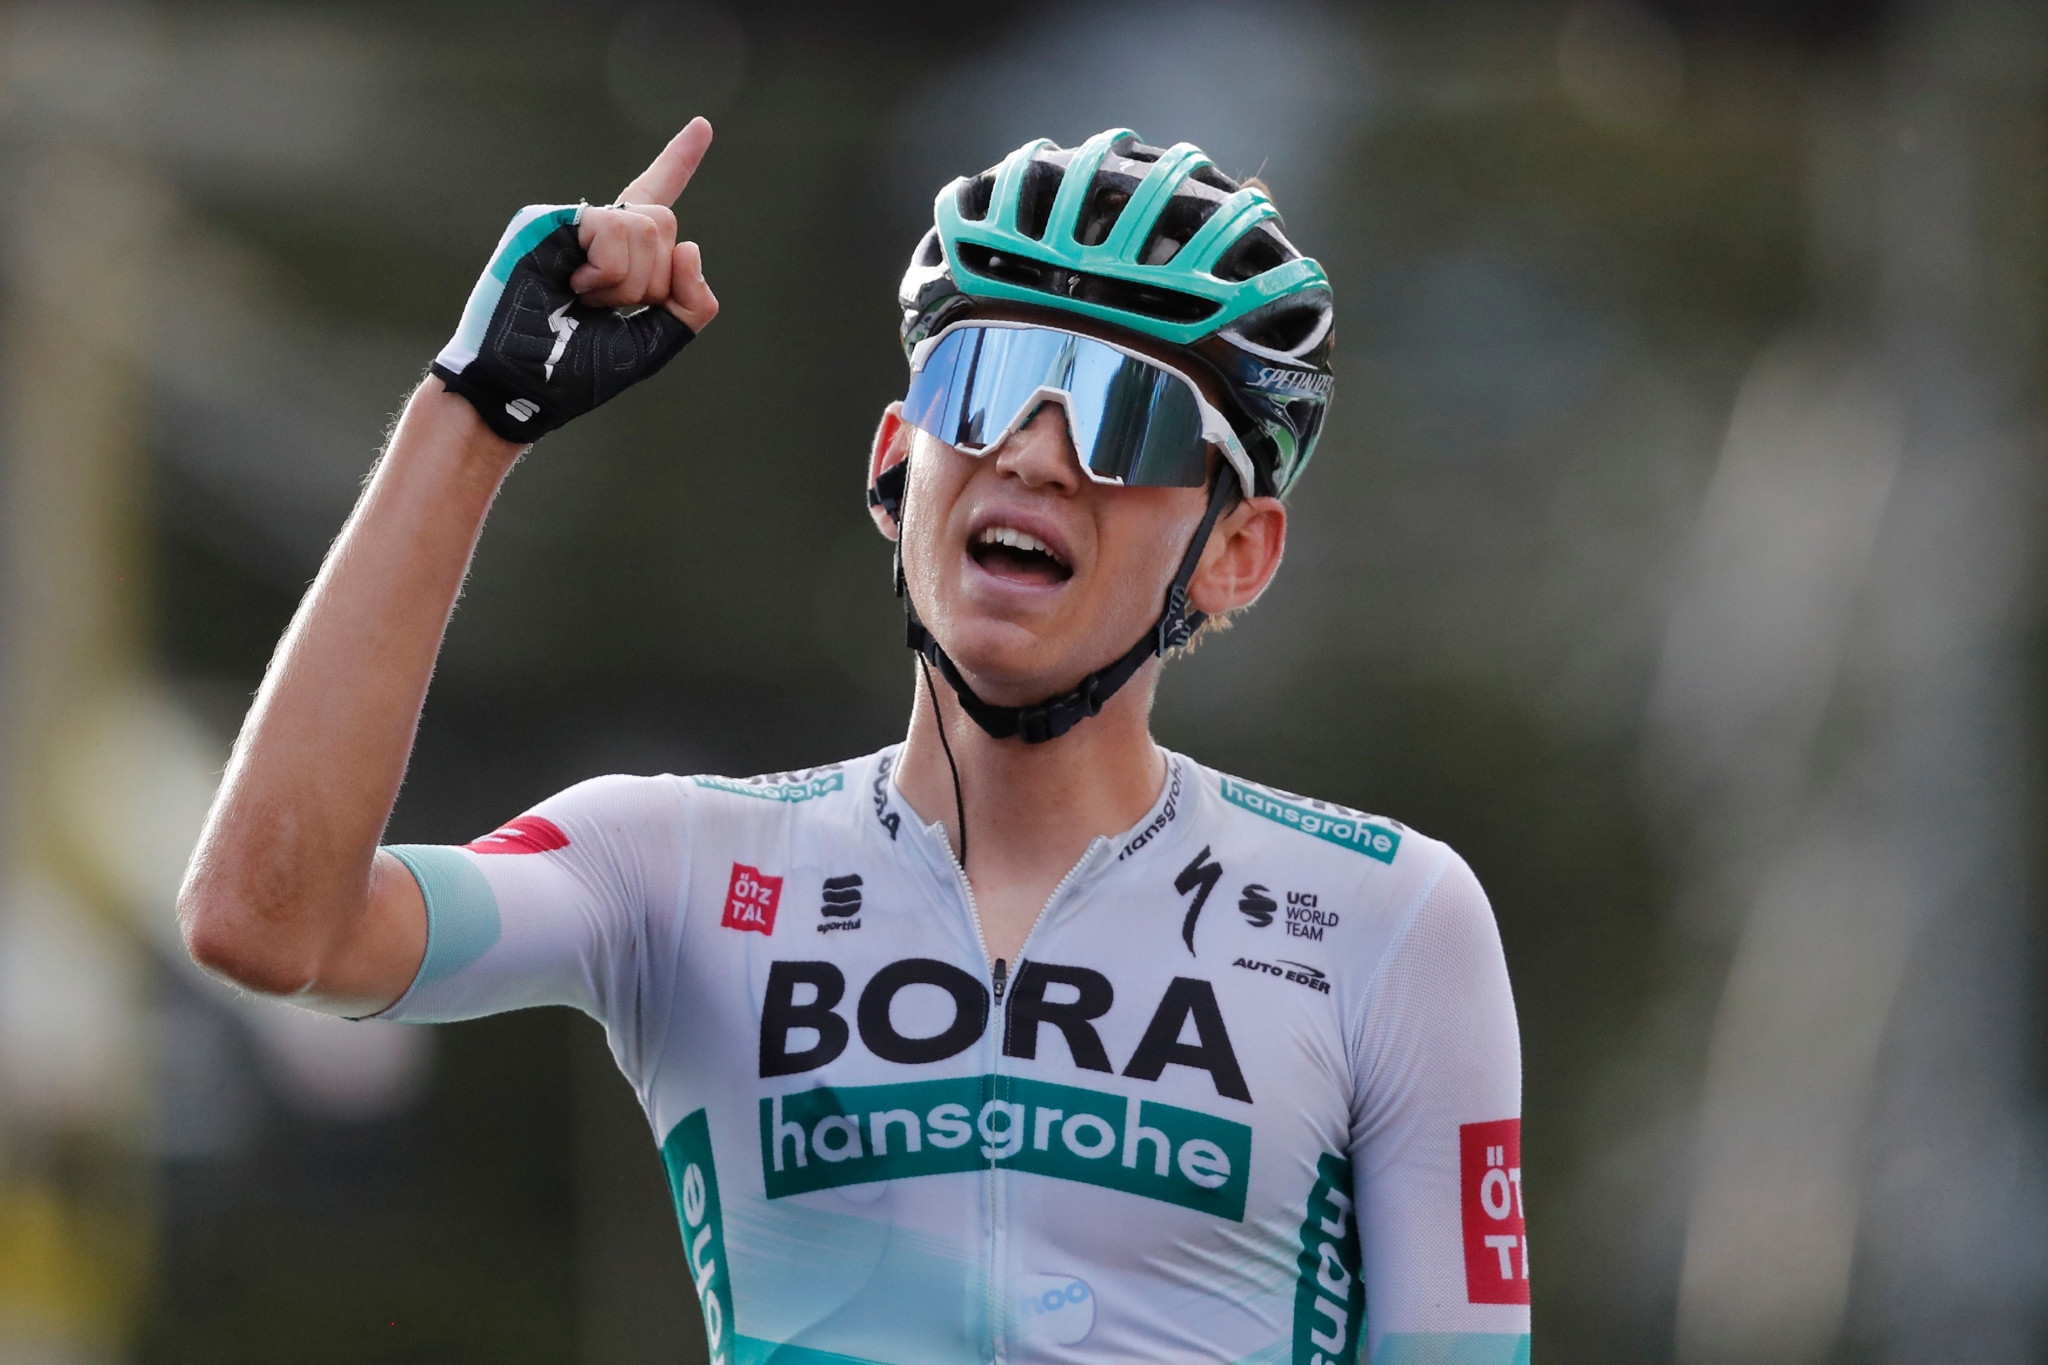 Kämna wins stage 16 of Tour de France after colossal breakaway from peloton